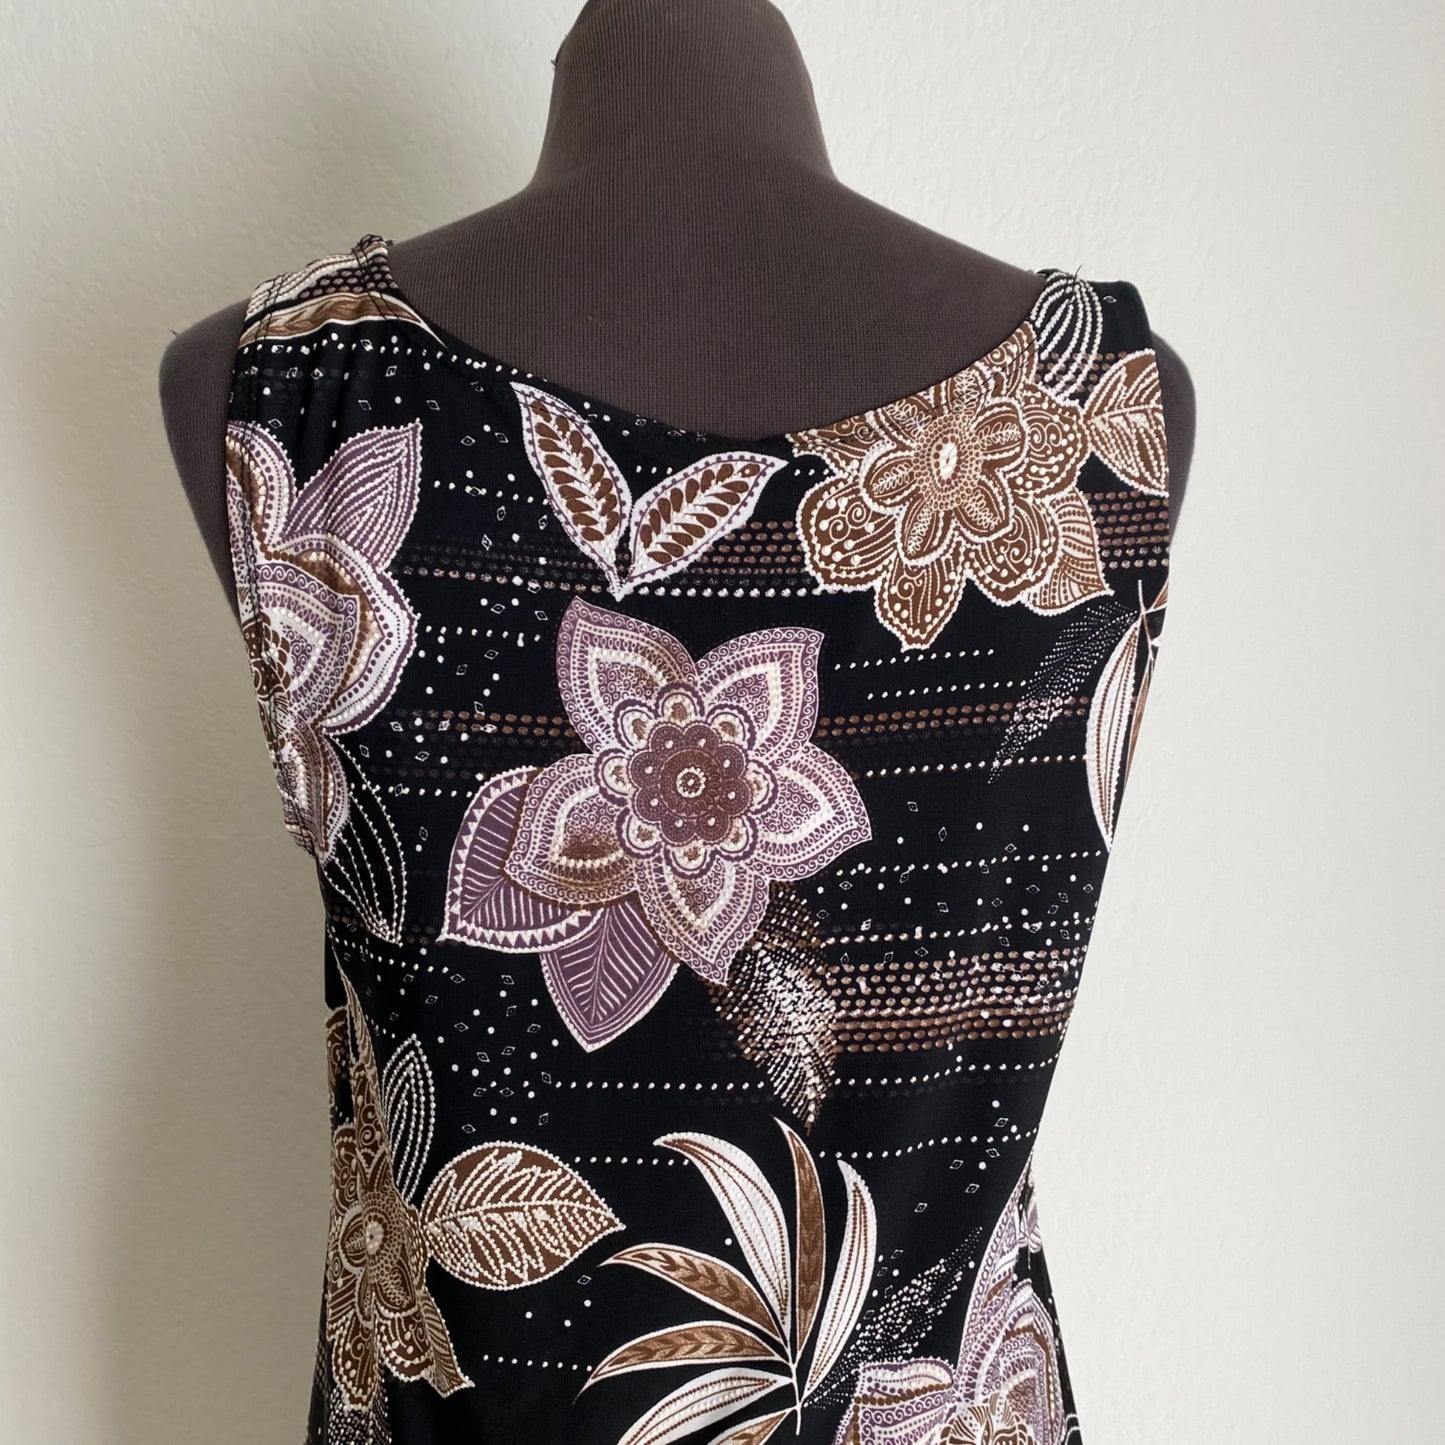 R&M Richards sz 6 floral shift midi dress with silver necklace NWT (Dress only)